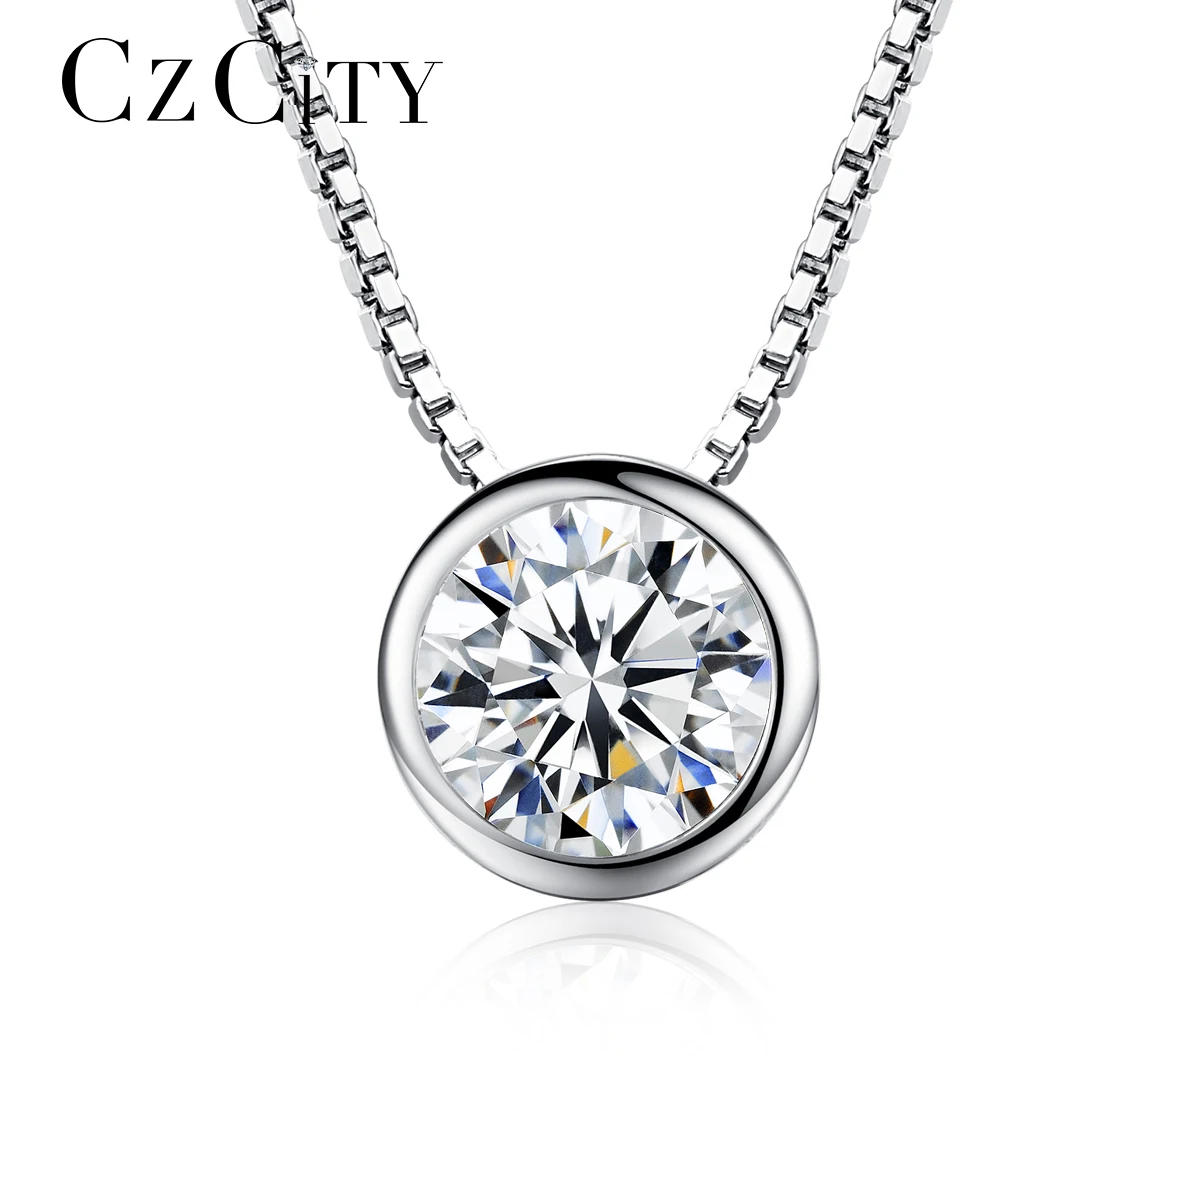 

CZCITY Top Quality 1 Carat Single Clear Cubic Zirconia S925 Sterling Silver Jewelry Bridal Engagement Silver Pendant Necklace